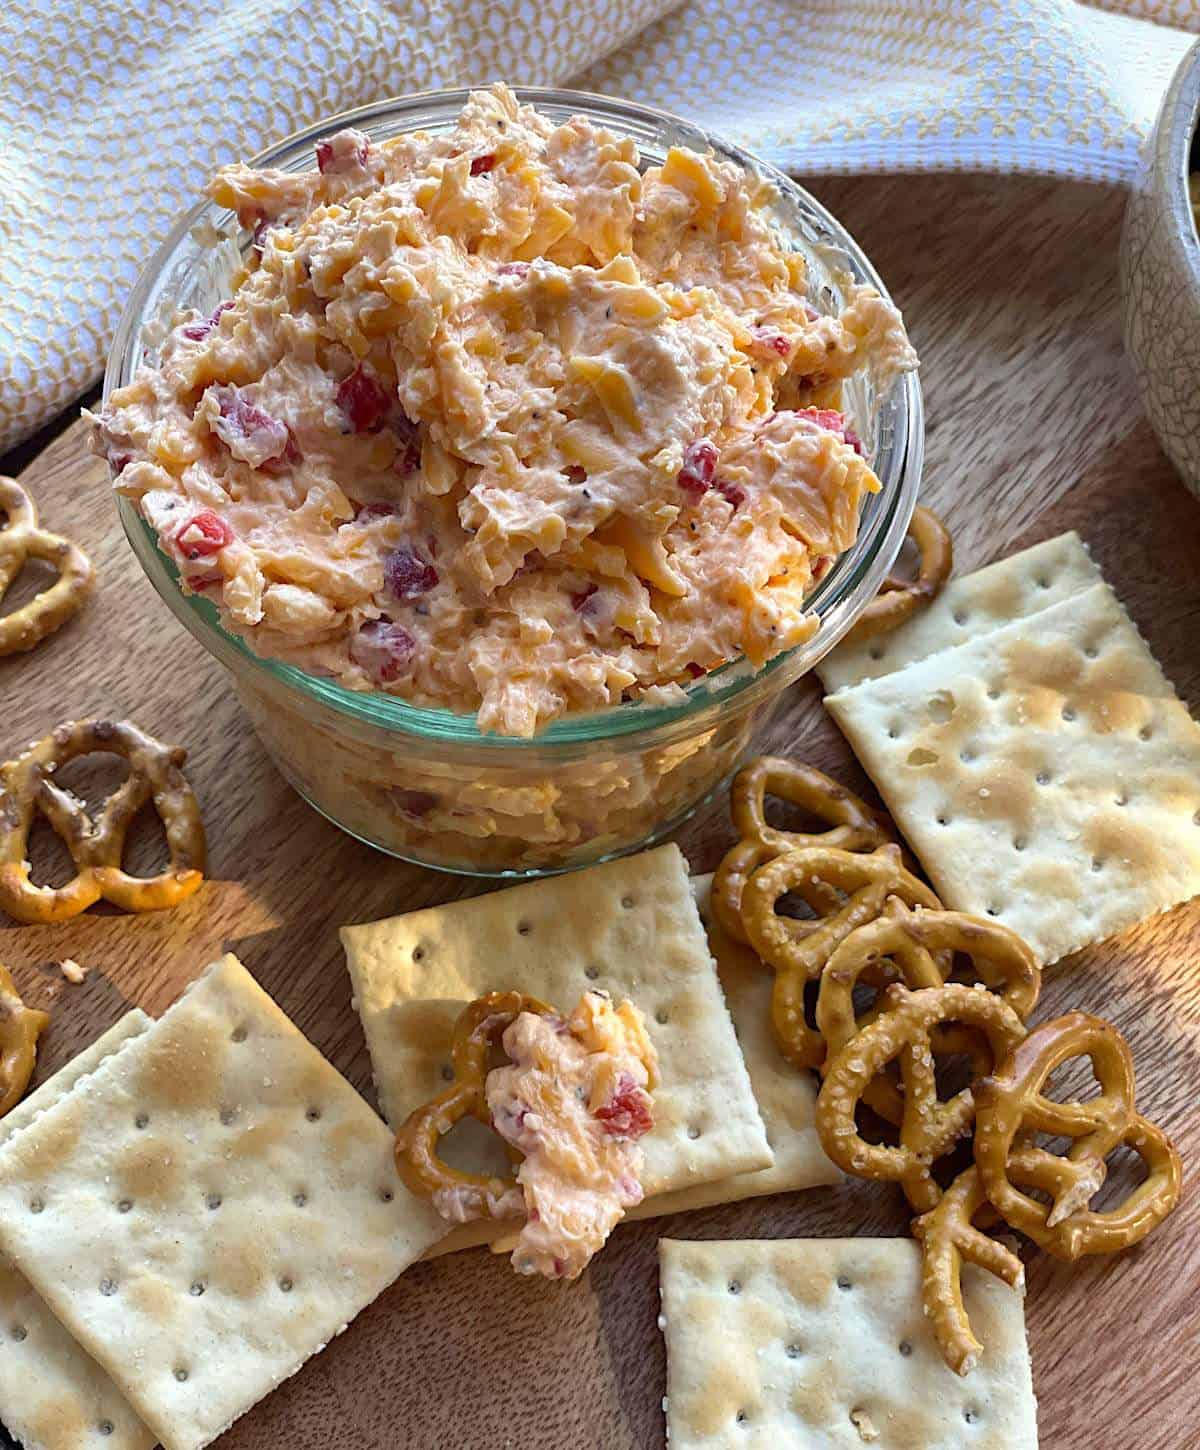 A glass bowl of homemade cheese spread surrounded by pretzels and crackers.